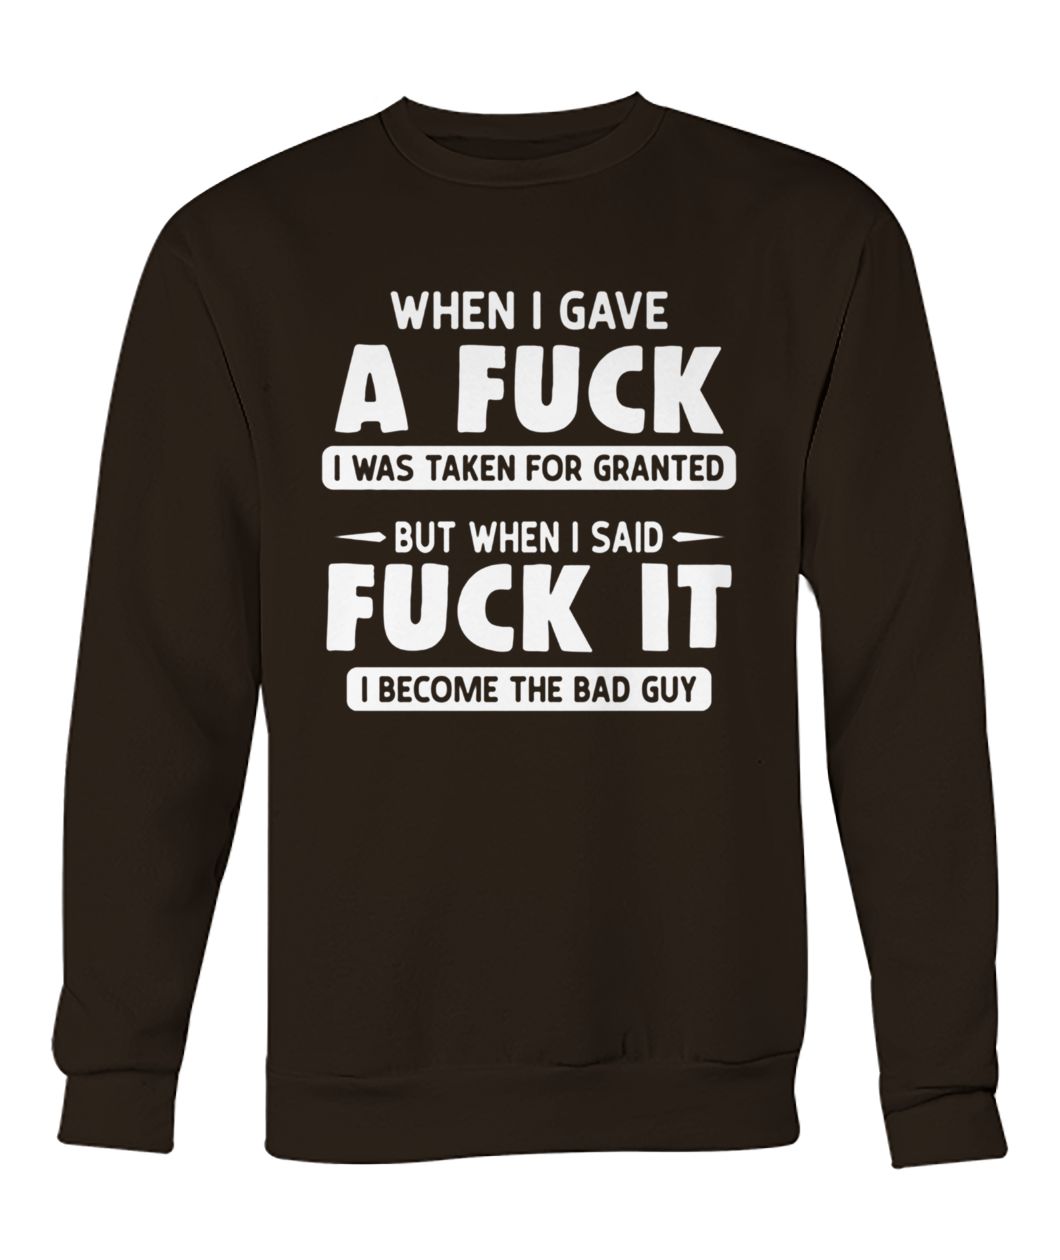 When I gave a fuck I was taken for granted but when I said fuck it I become the bad guy crew neck sweatshirt